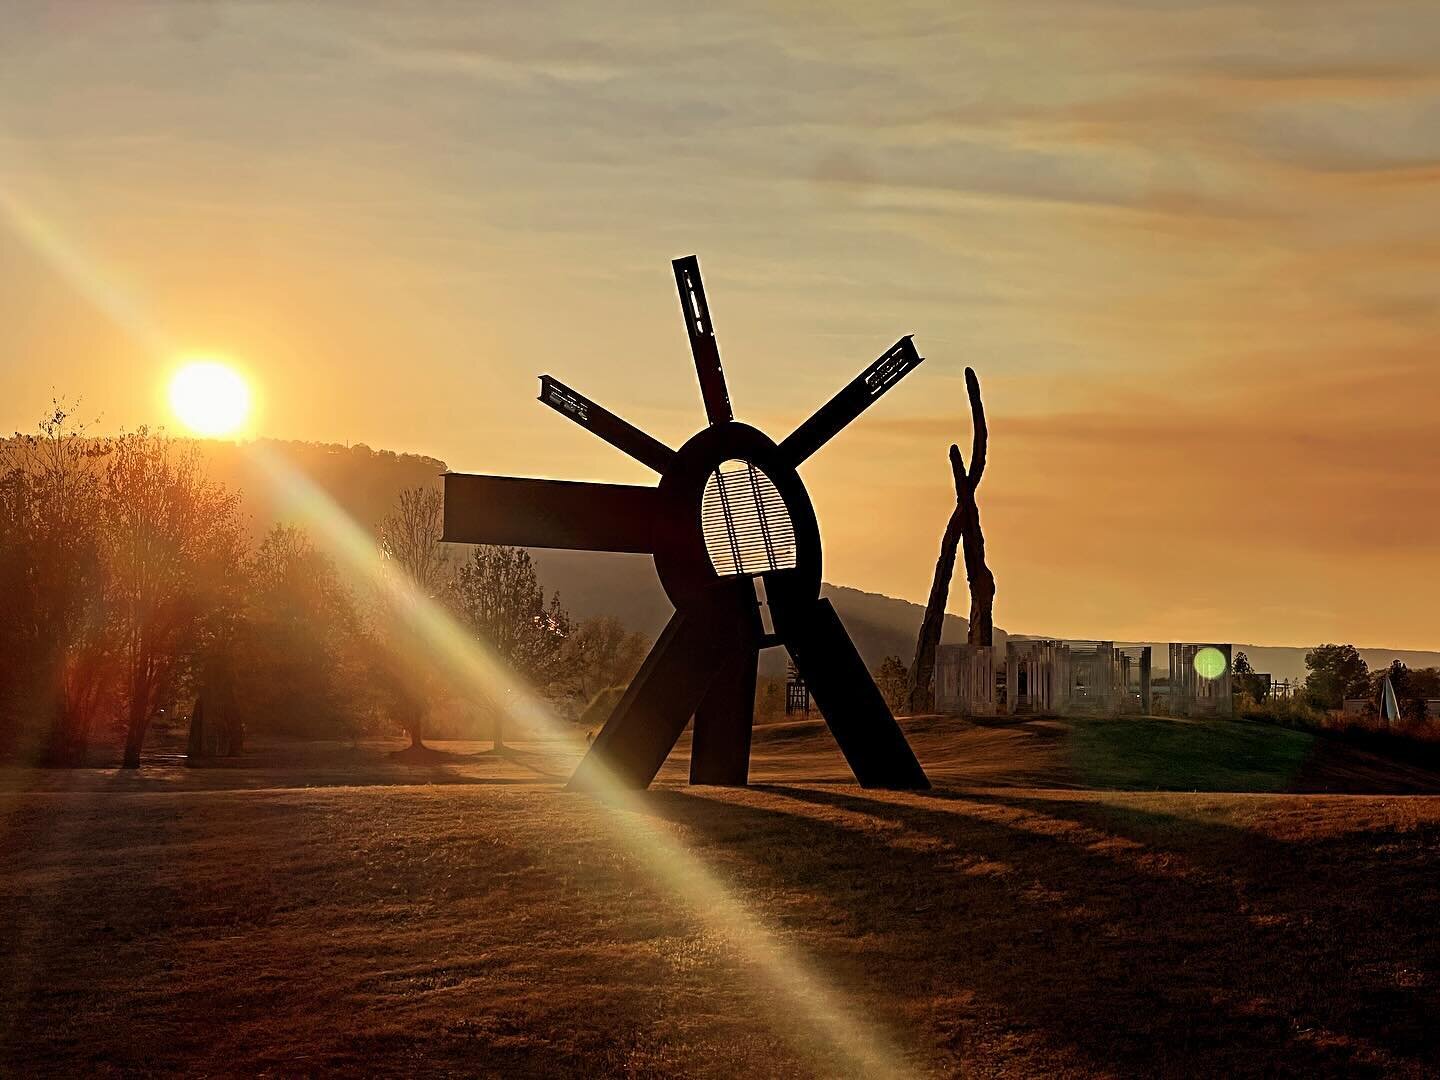 Early sunsets = intentional time for exercise. Stop by Sculpture Fields after work to enjoy a quick (or not so quick) hike around and throughout the park. No excuses! #getoutside Pictured: &ldquo;Express&rdquo; by sculptor Stretch